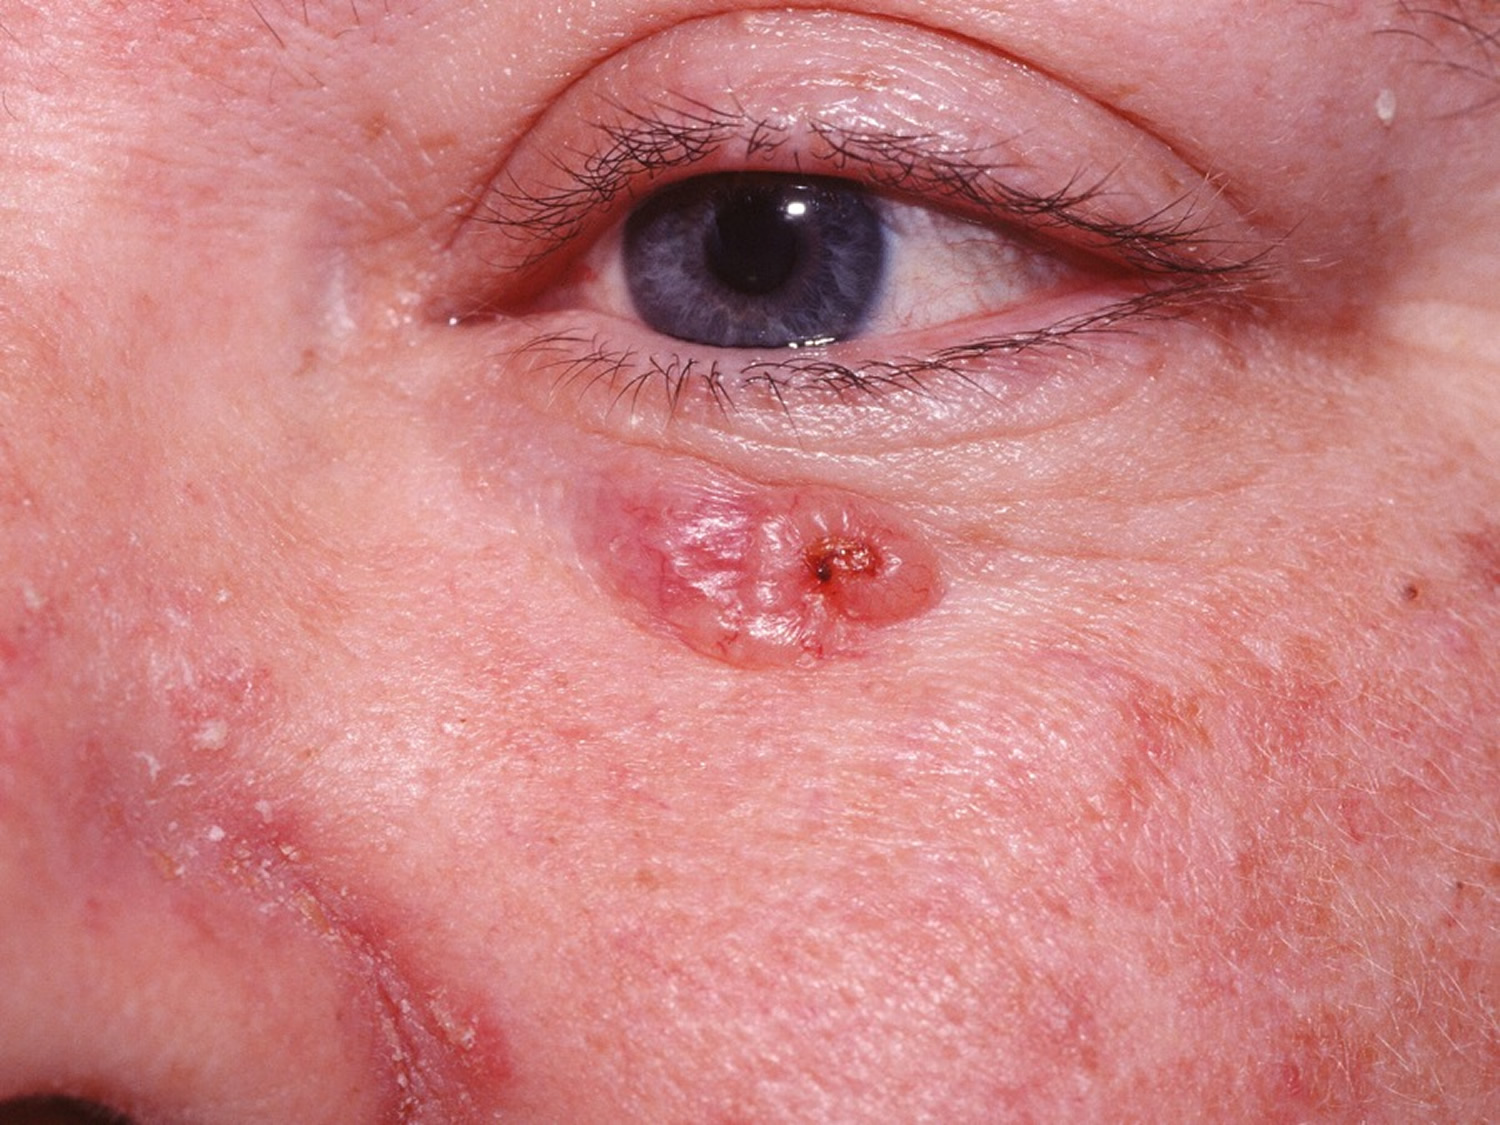 Basal Cell Carcinoma - Causes, Types, Symptoms, Prognosis, Treatment